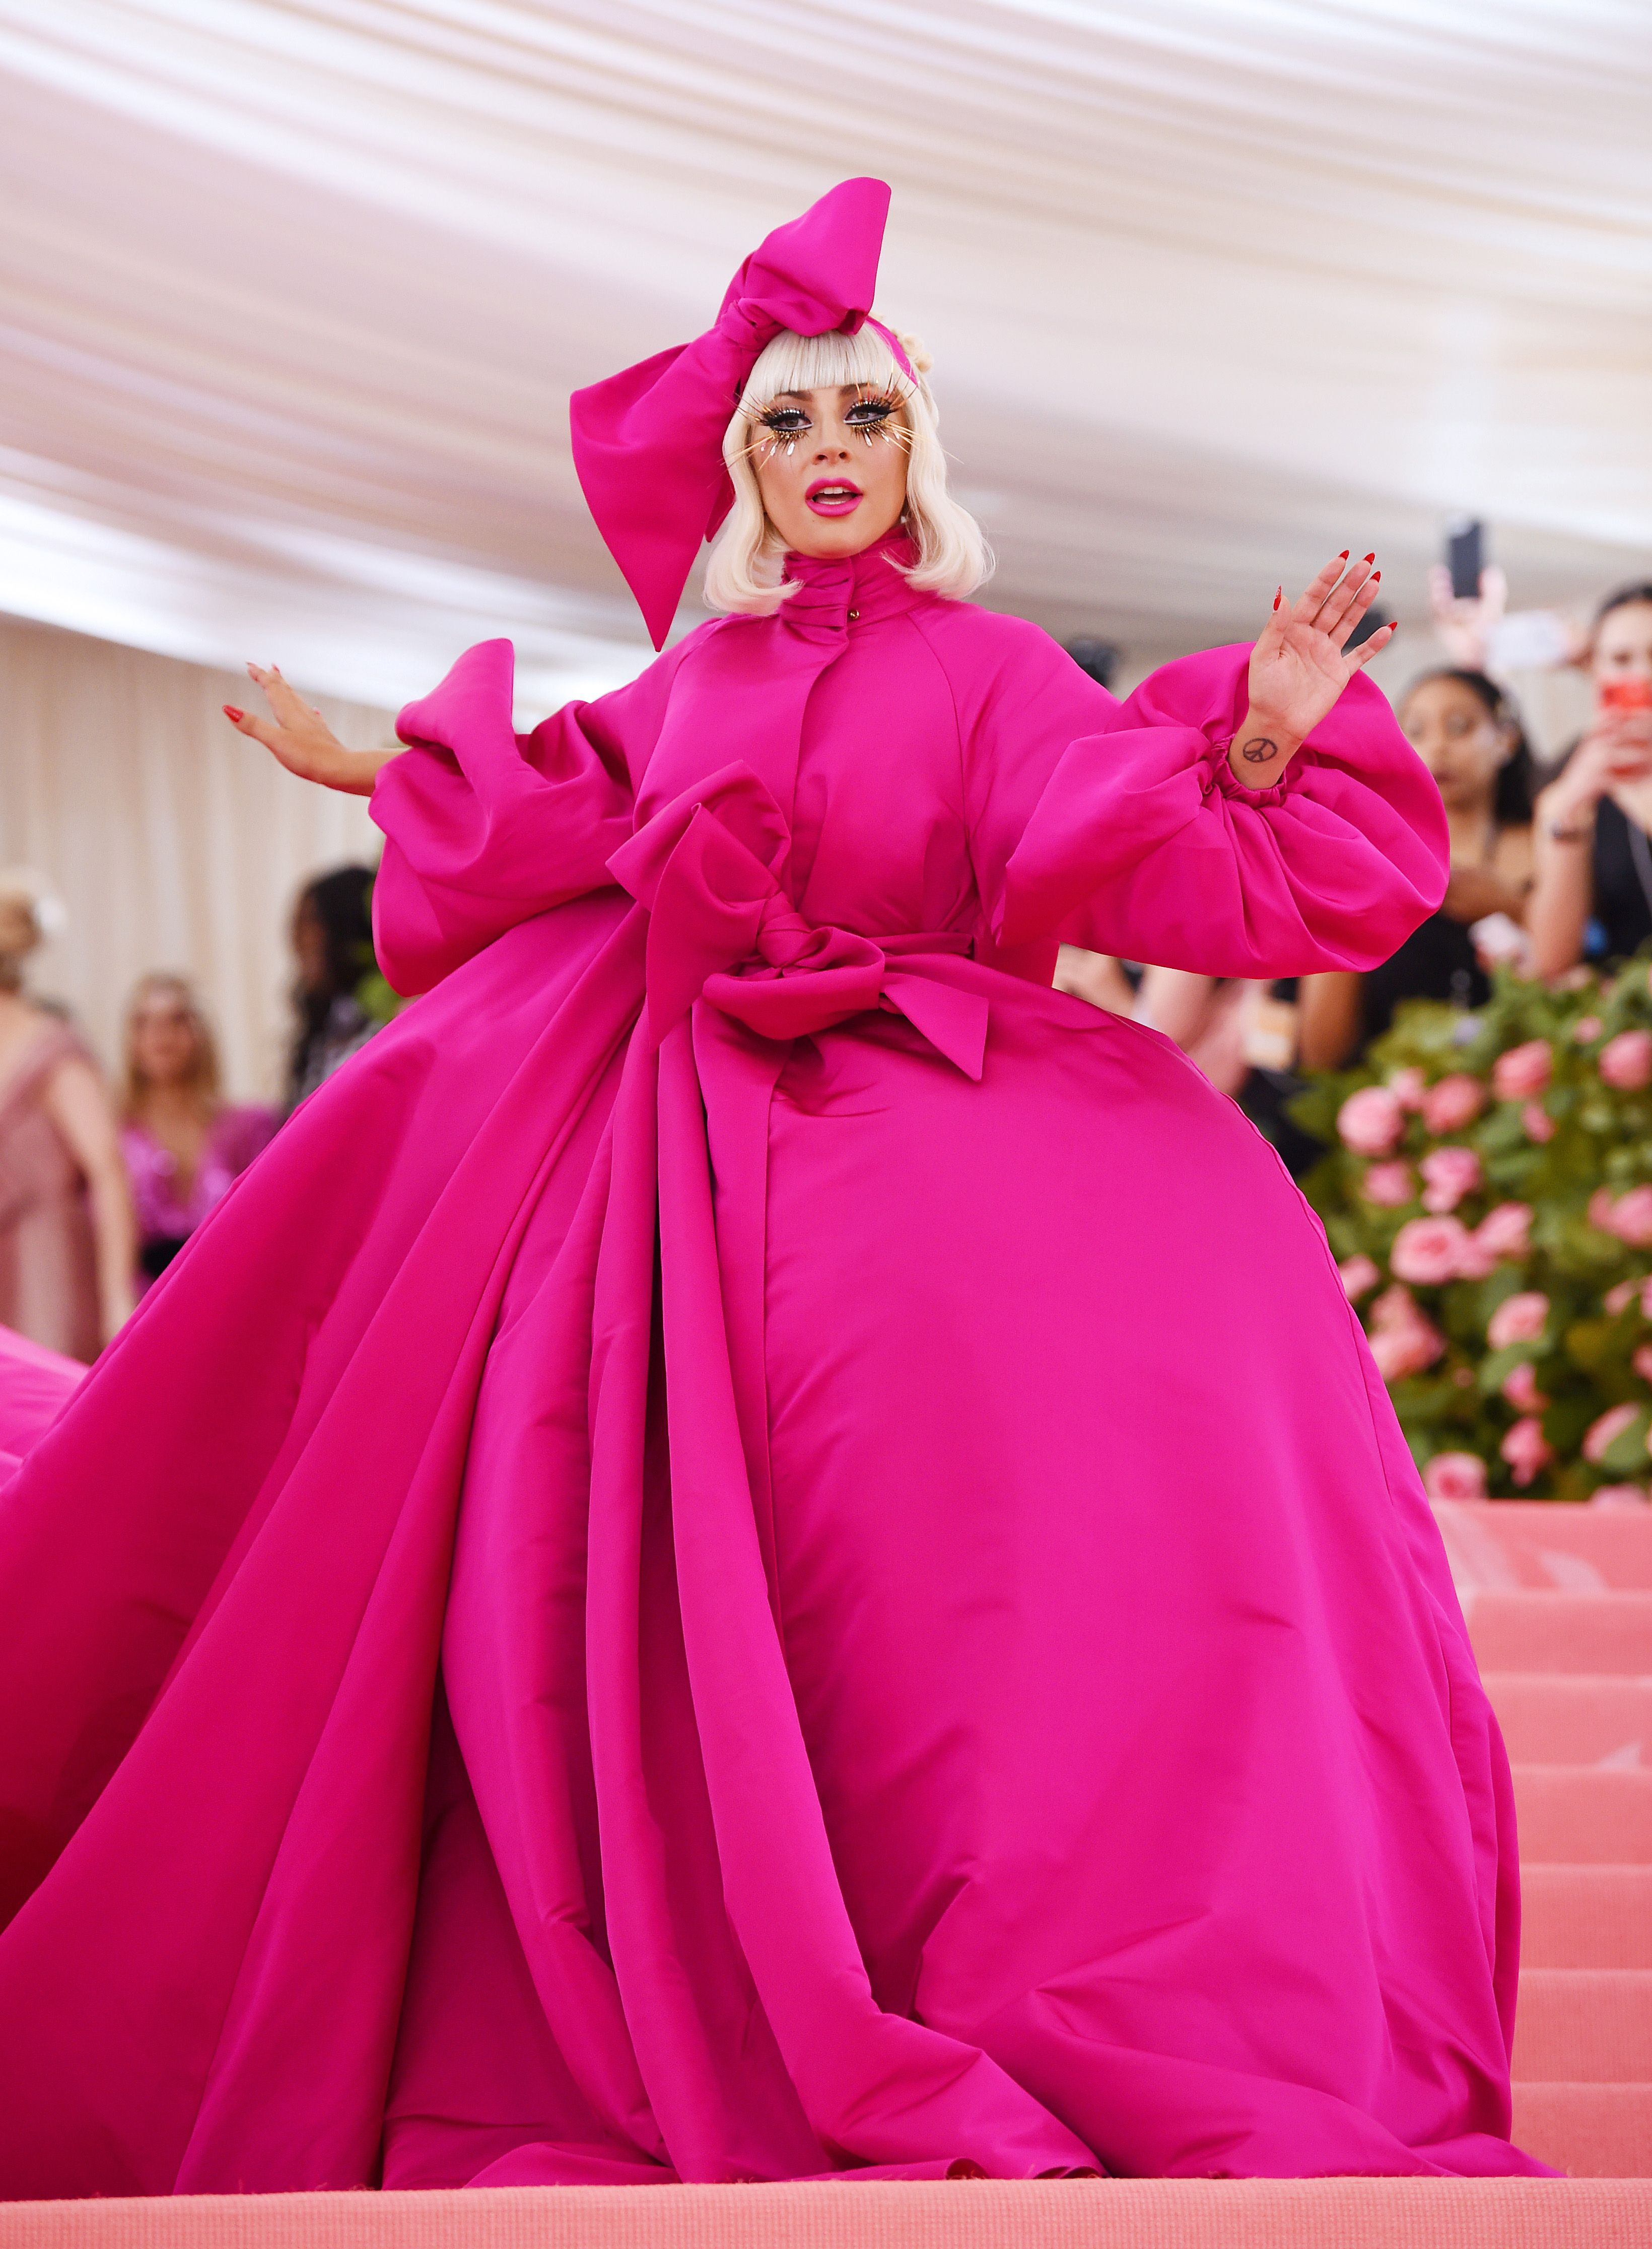 Met Gala 2021: The Best and Most Outrageous Looks – The Hollywood Reporter